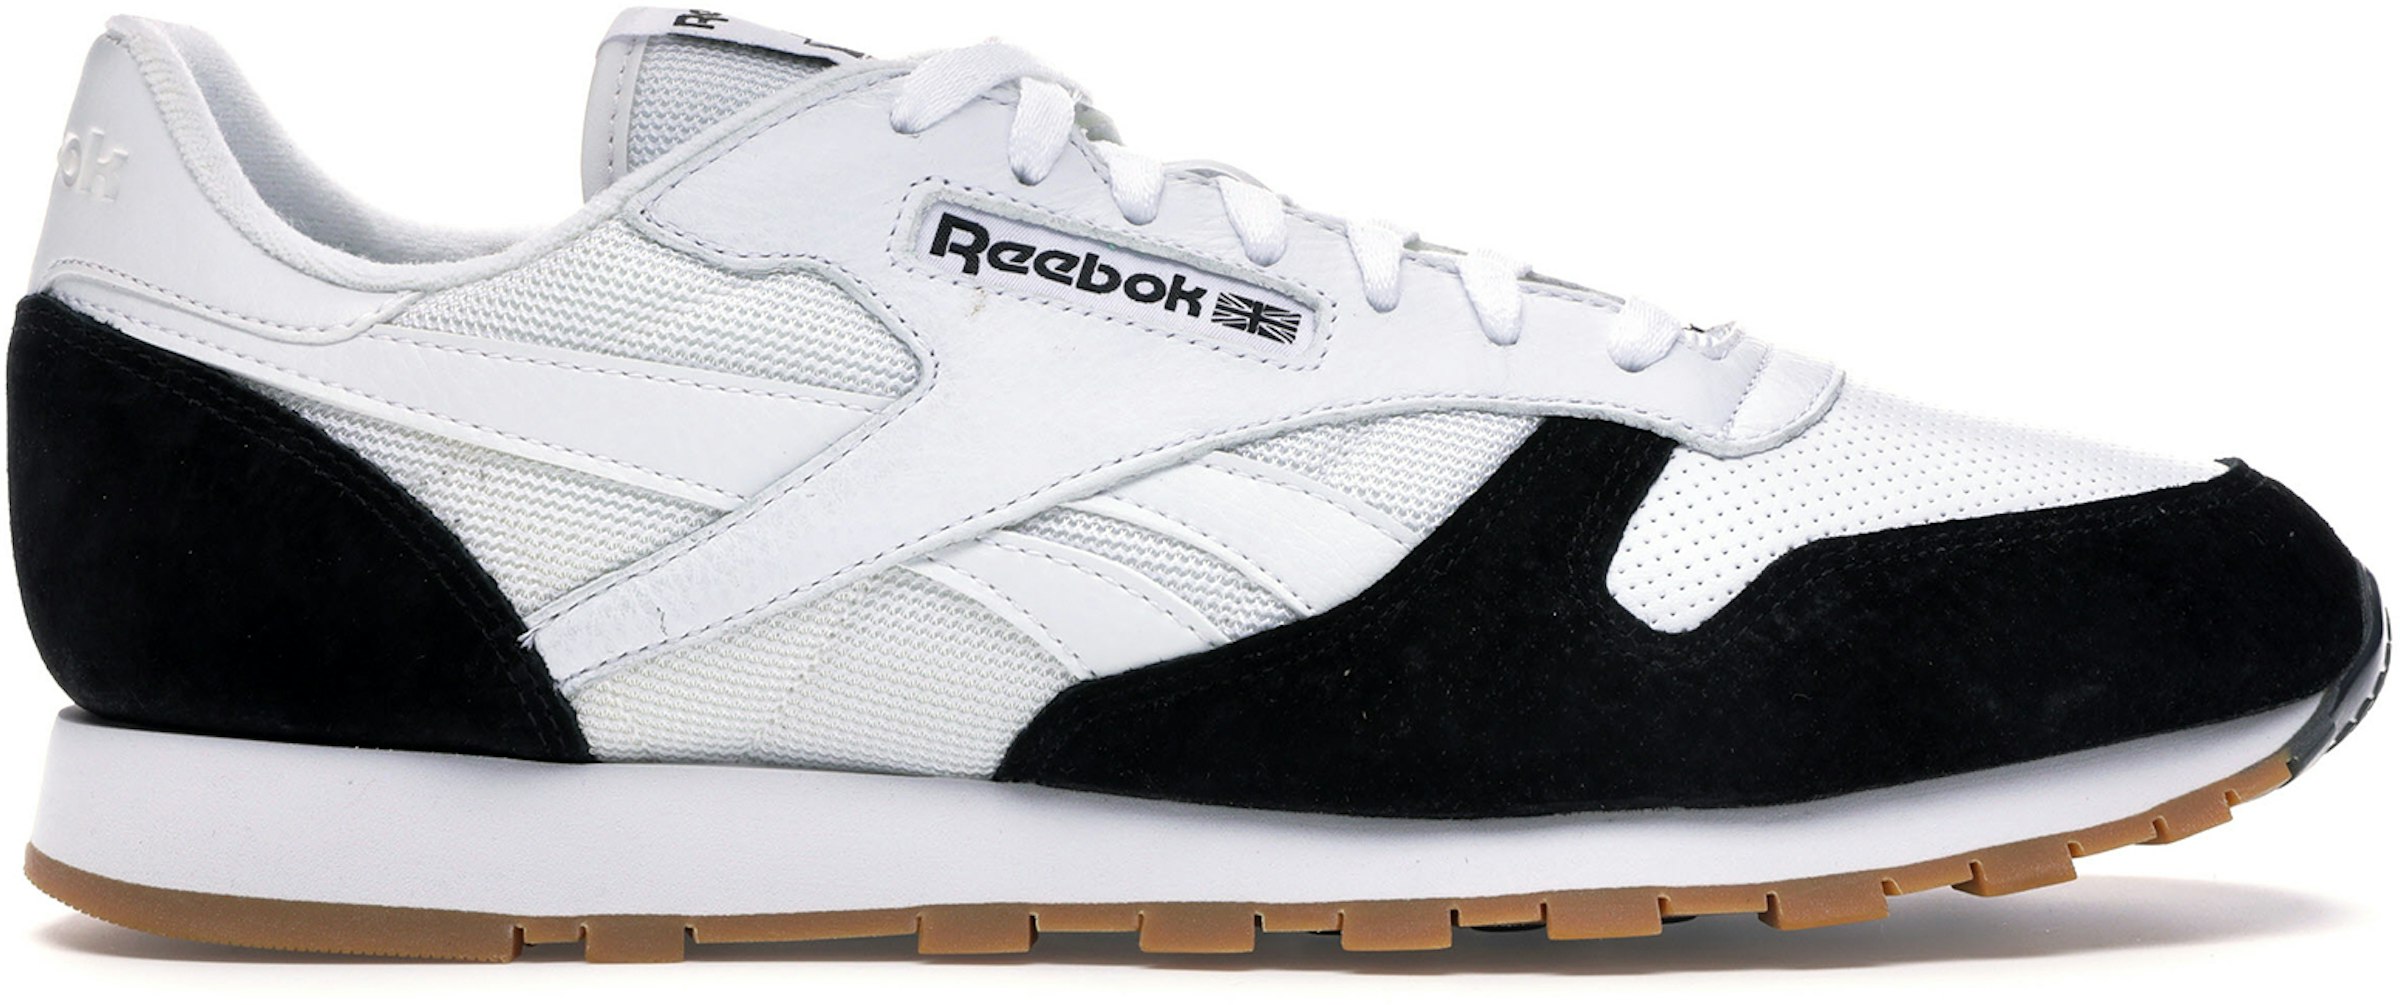 Over instelling Toeval climax Reebok Classic Leather Kendrick Lamar Perfect Split White Men's - AR1894 -  GB